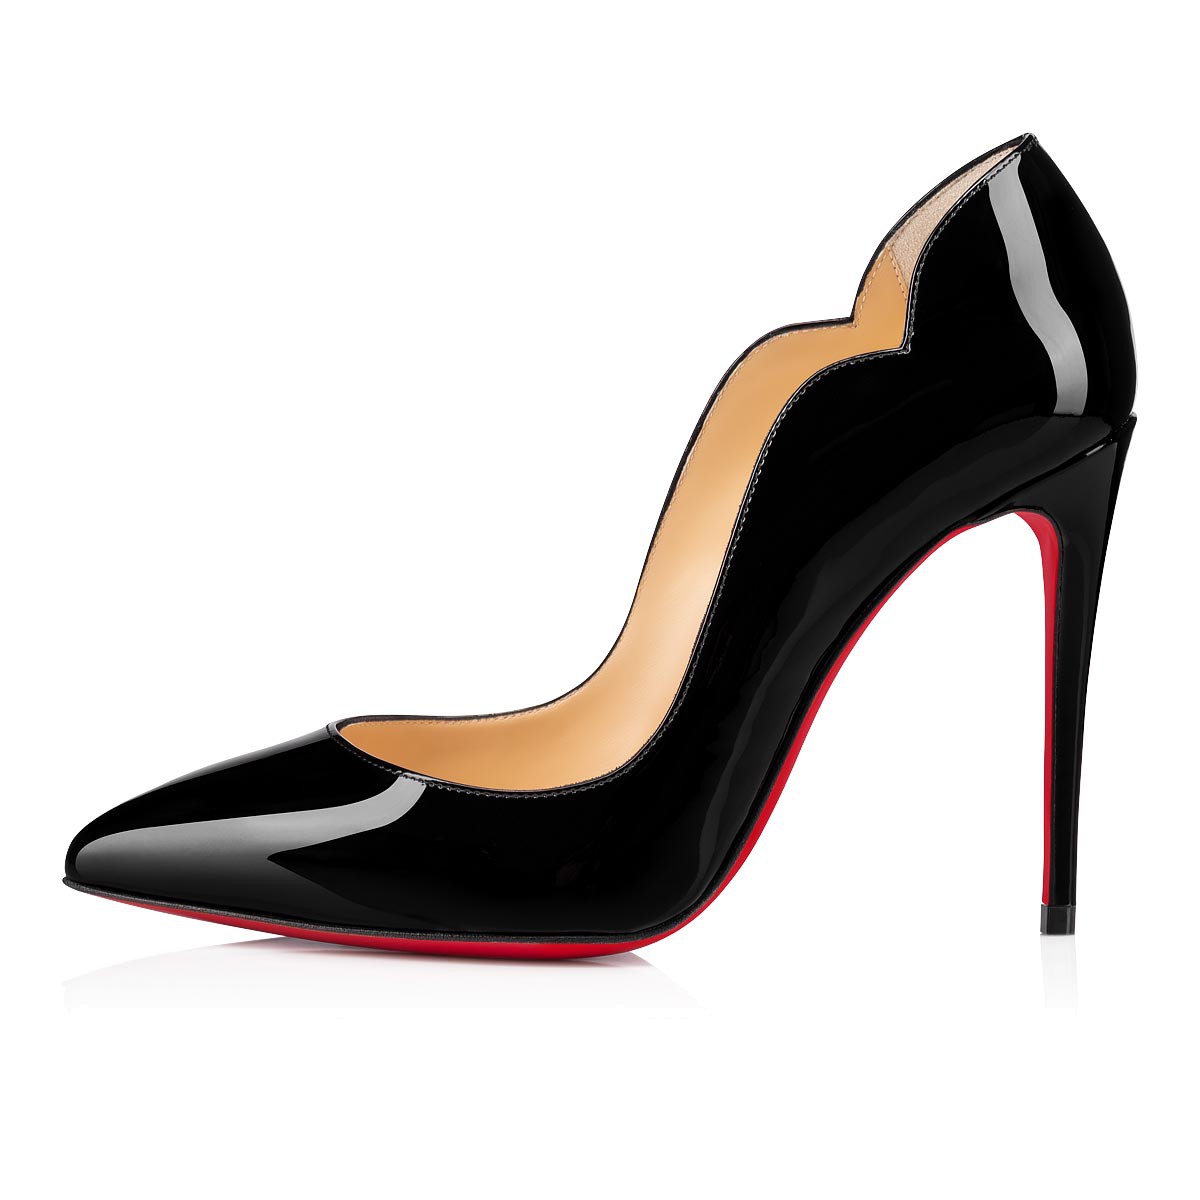 Christian Louboutin sur Twitter : Good style begins from the ground up.  #LouboutinWorld  /…